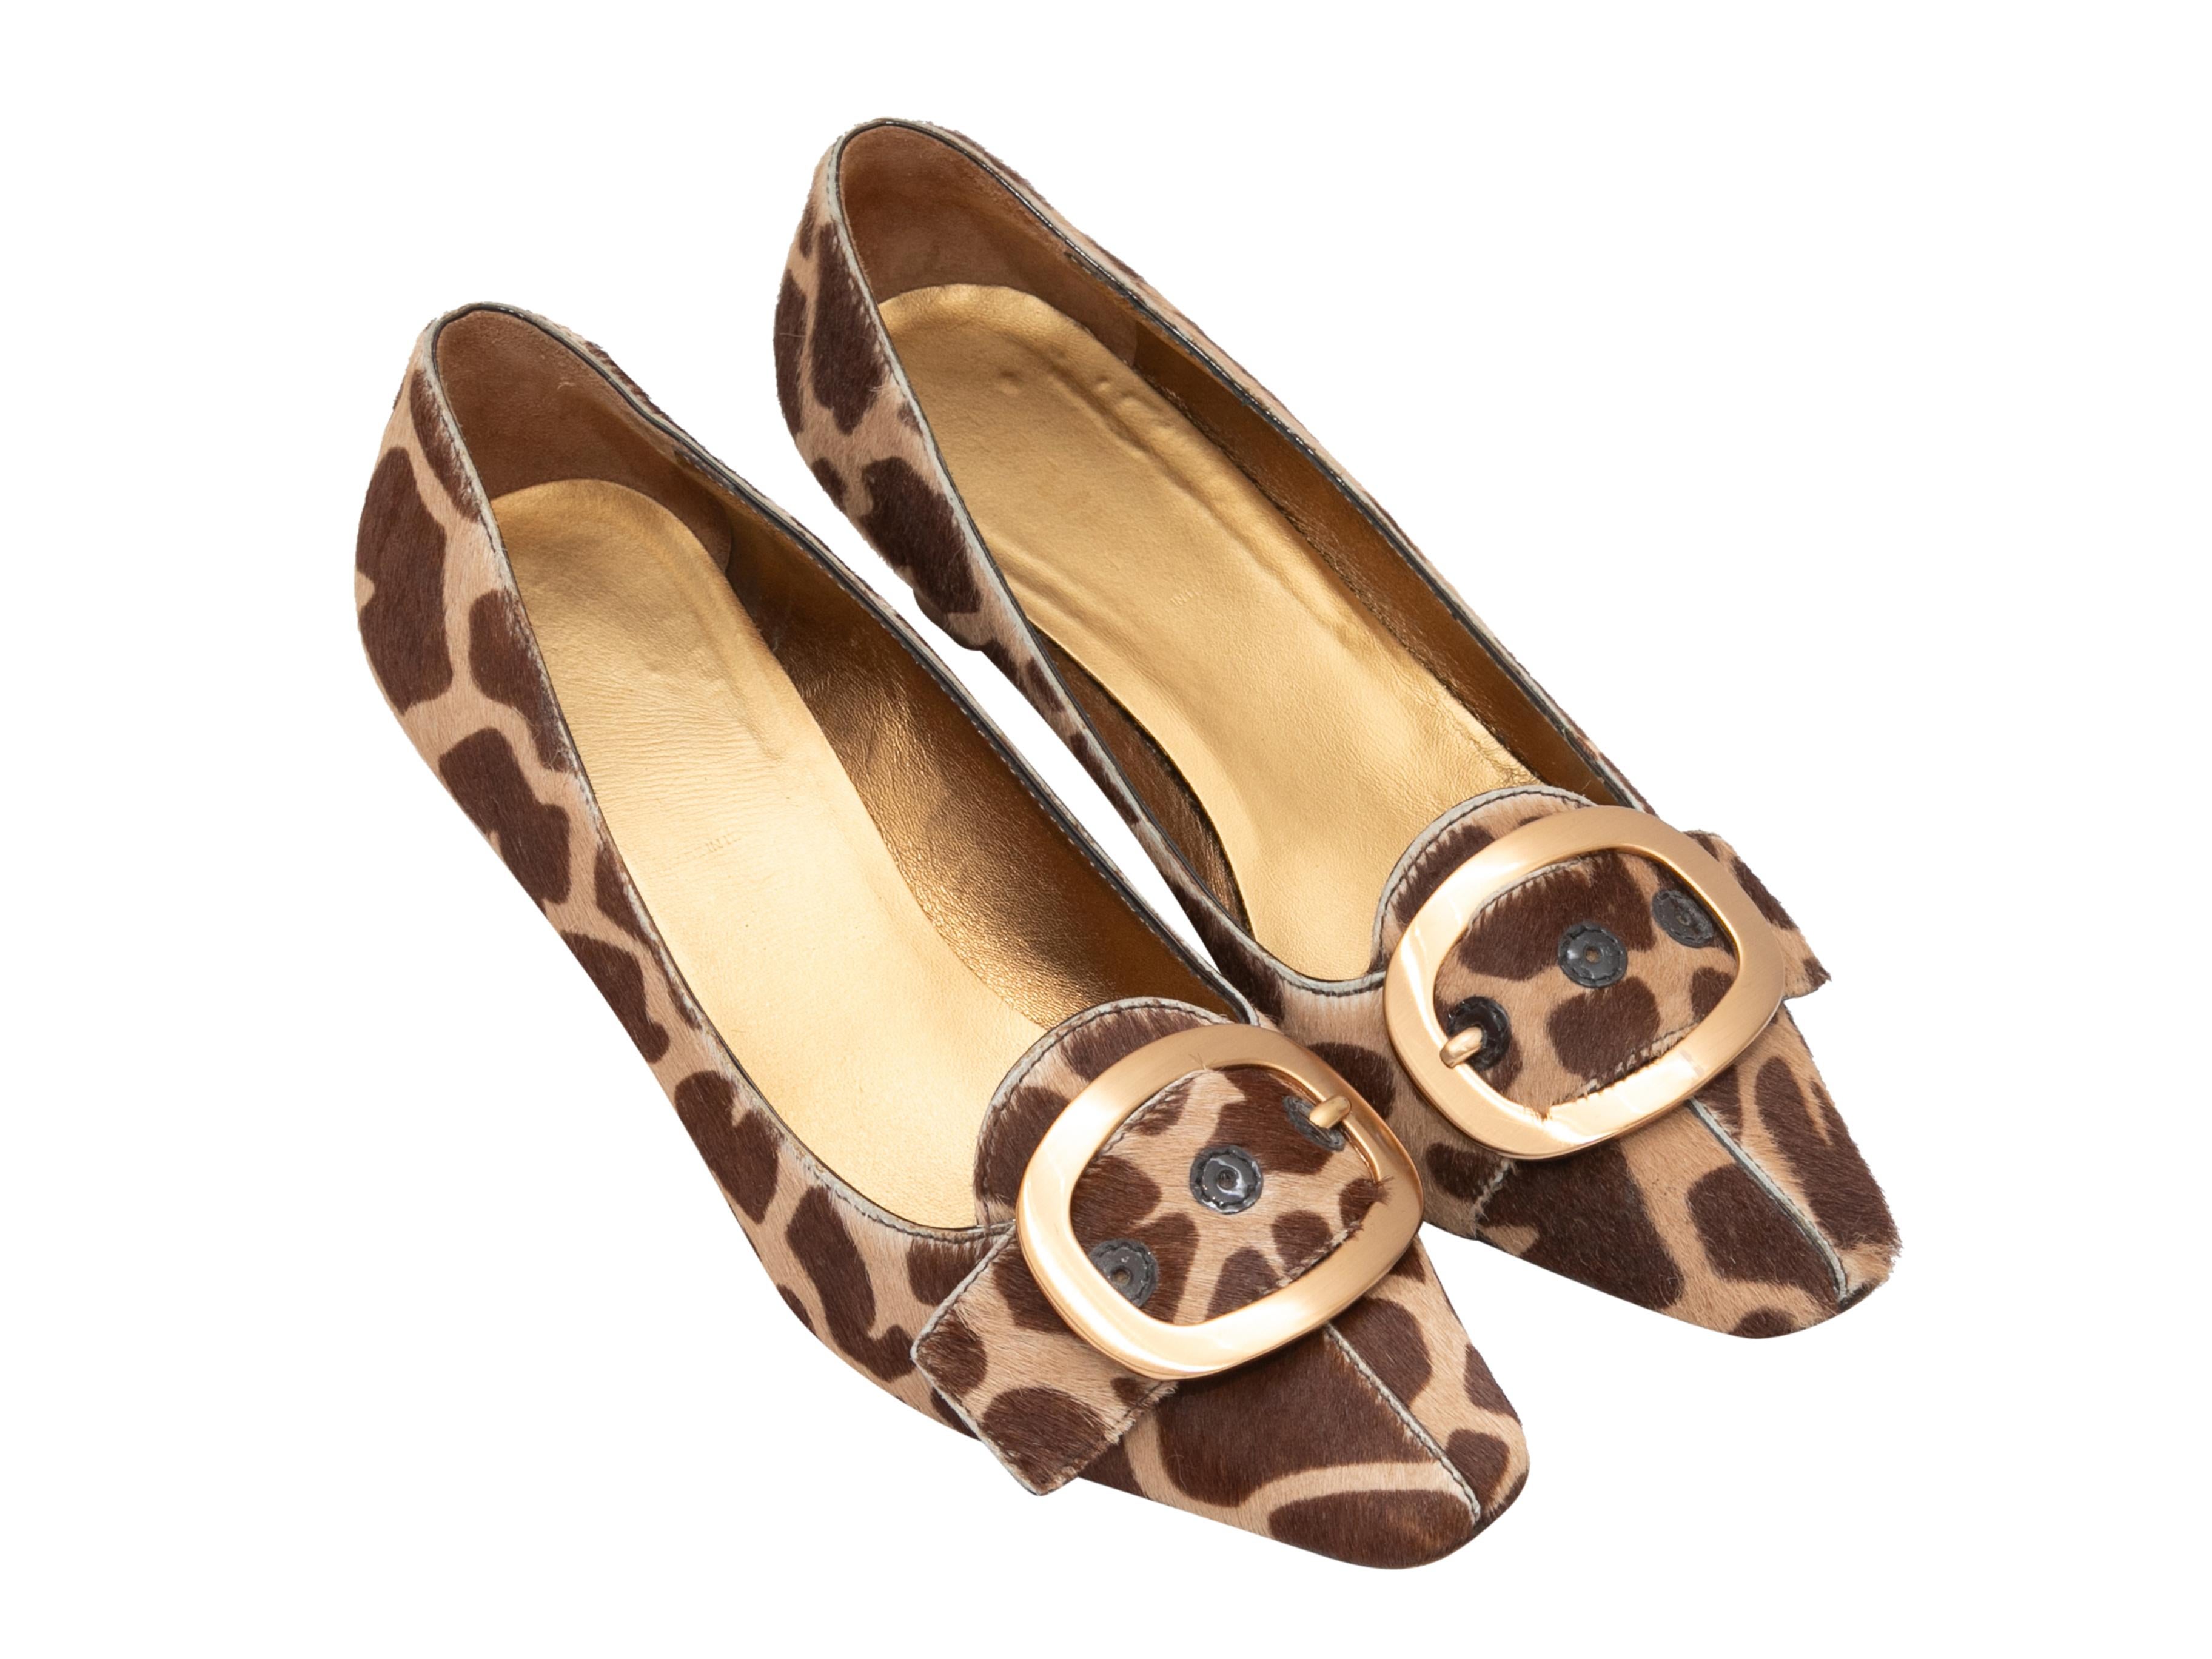 Brown and tan pointed-toe ponyhair animal print pumps by Prada. Buckle accents at tops. 1.75